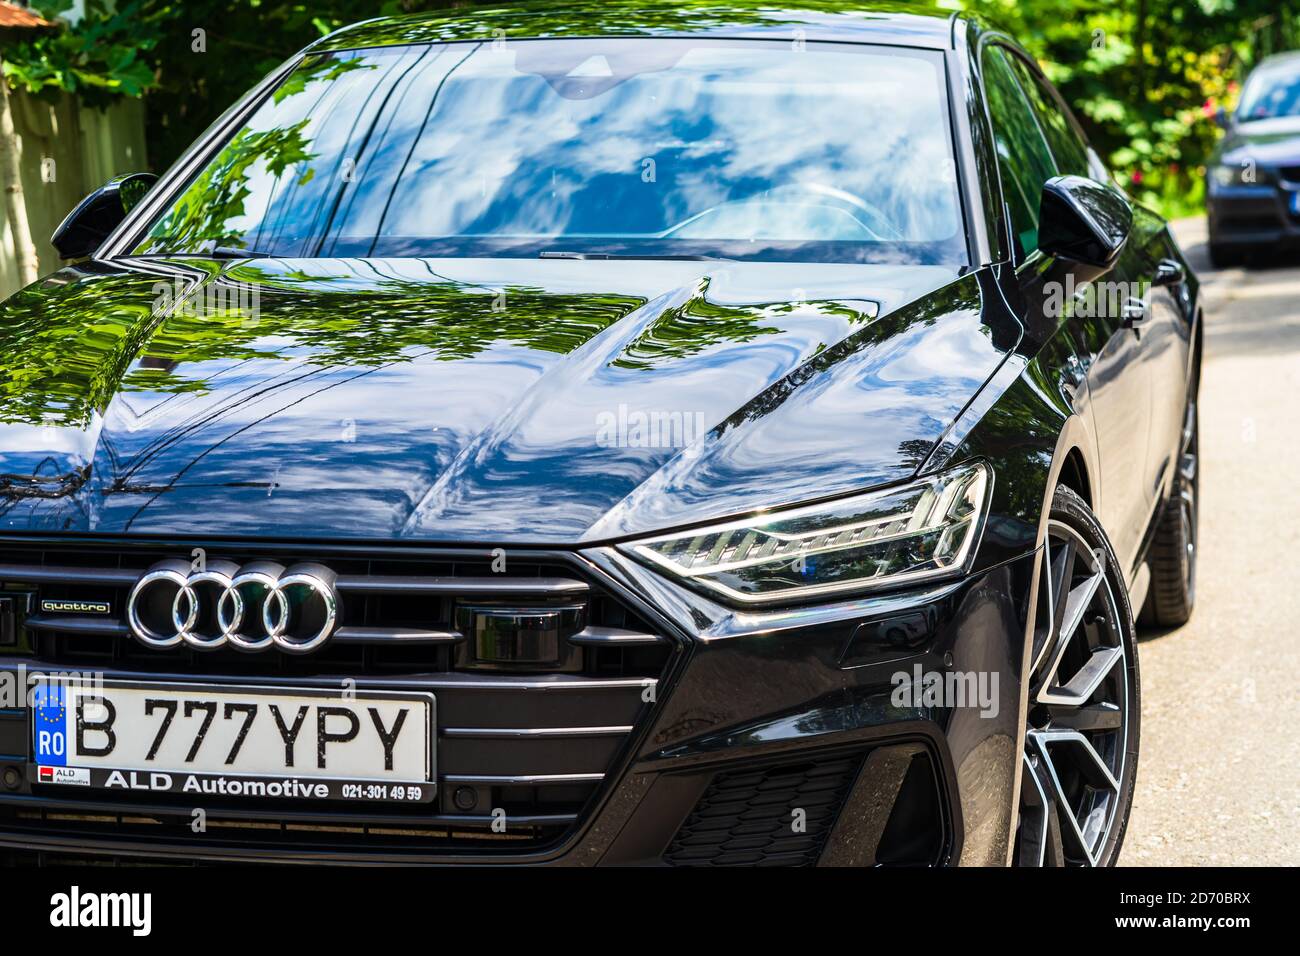 Audi A7 High Resolution Stock Photography and Images - Alamy